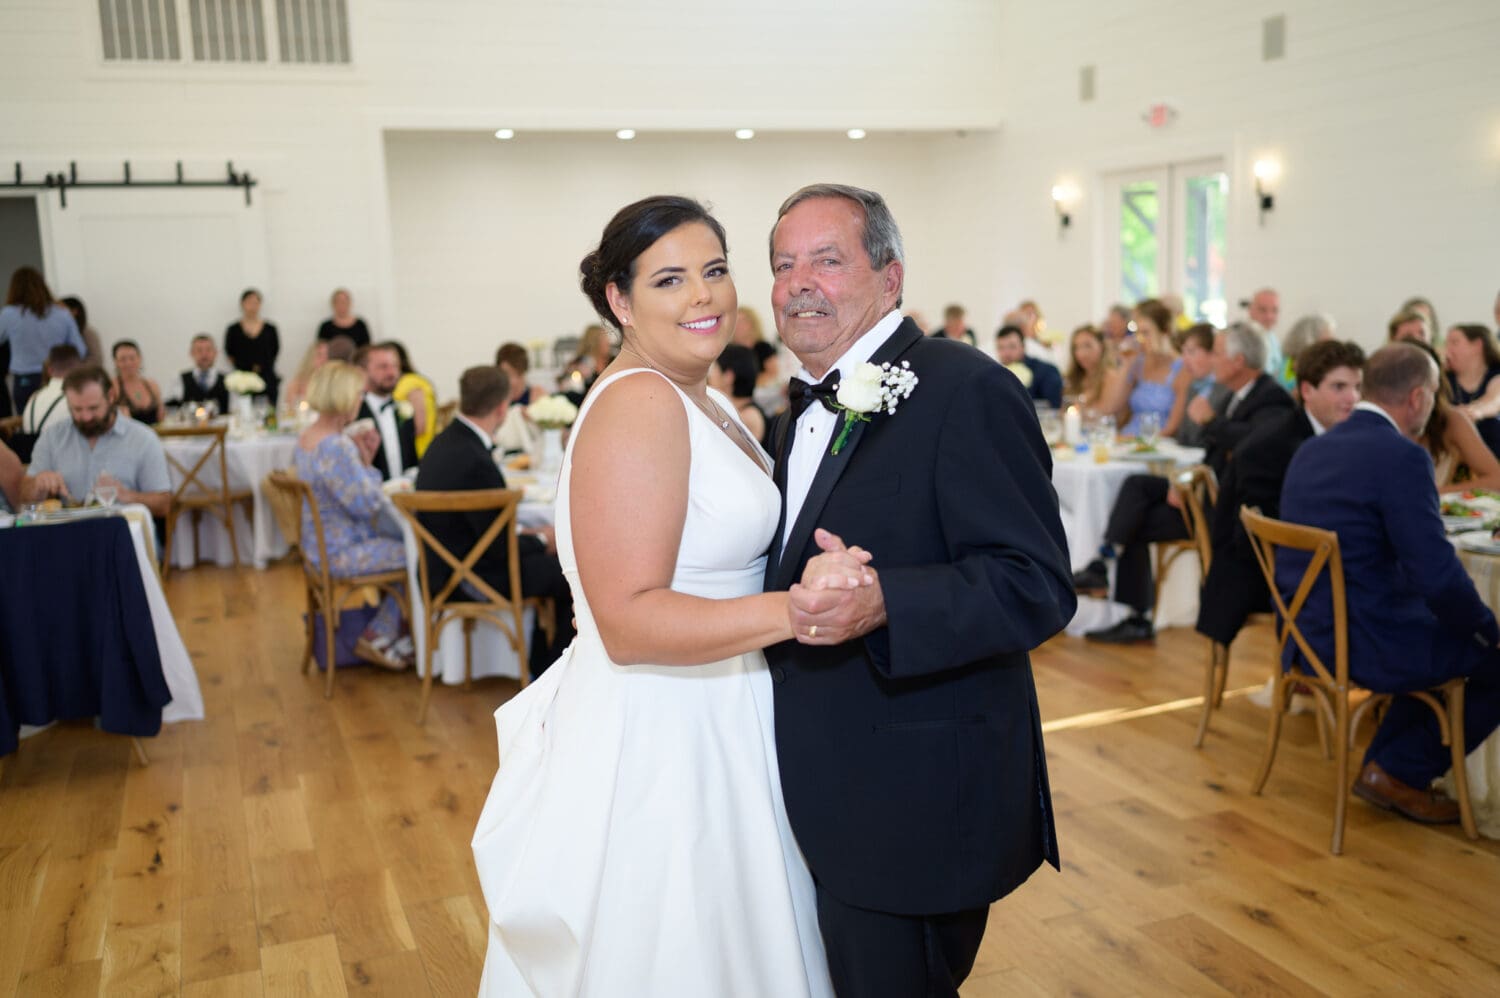 Dance with father - The Venue at White Oaks Farm